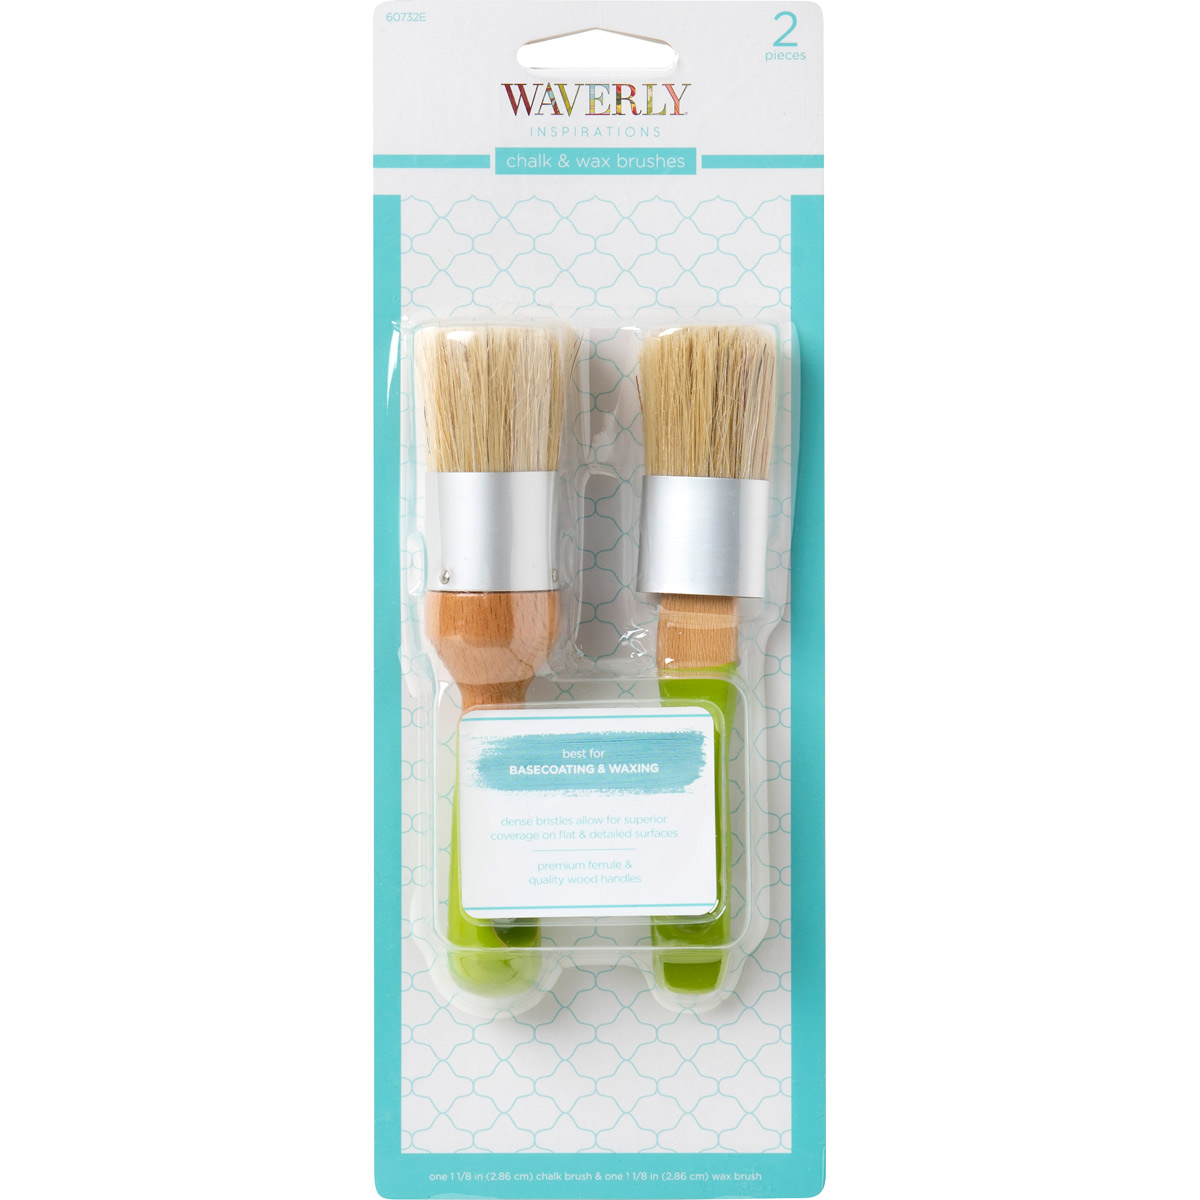 Waverly Inspirations Stencil Paint Brushes Set of Two 1 and 5/8 